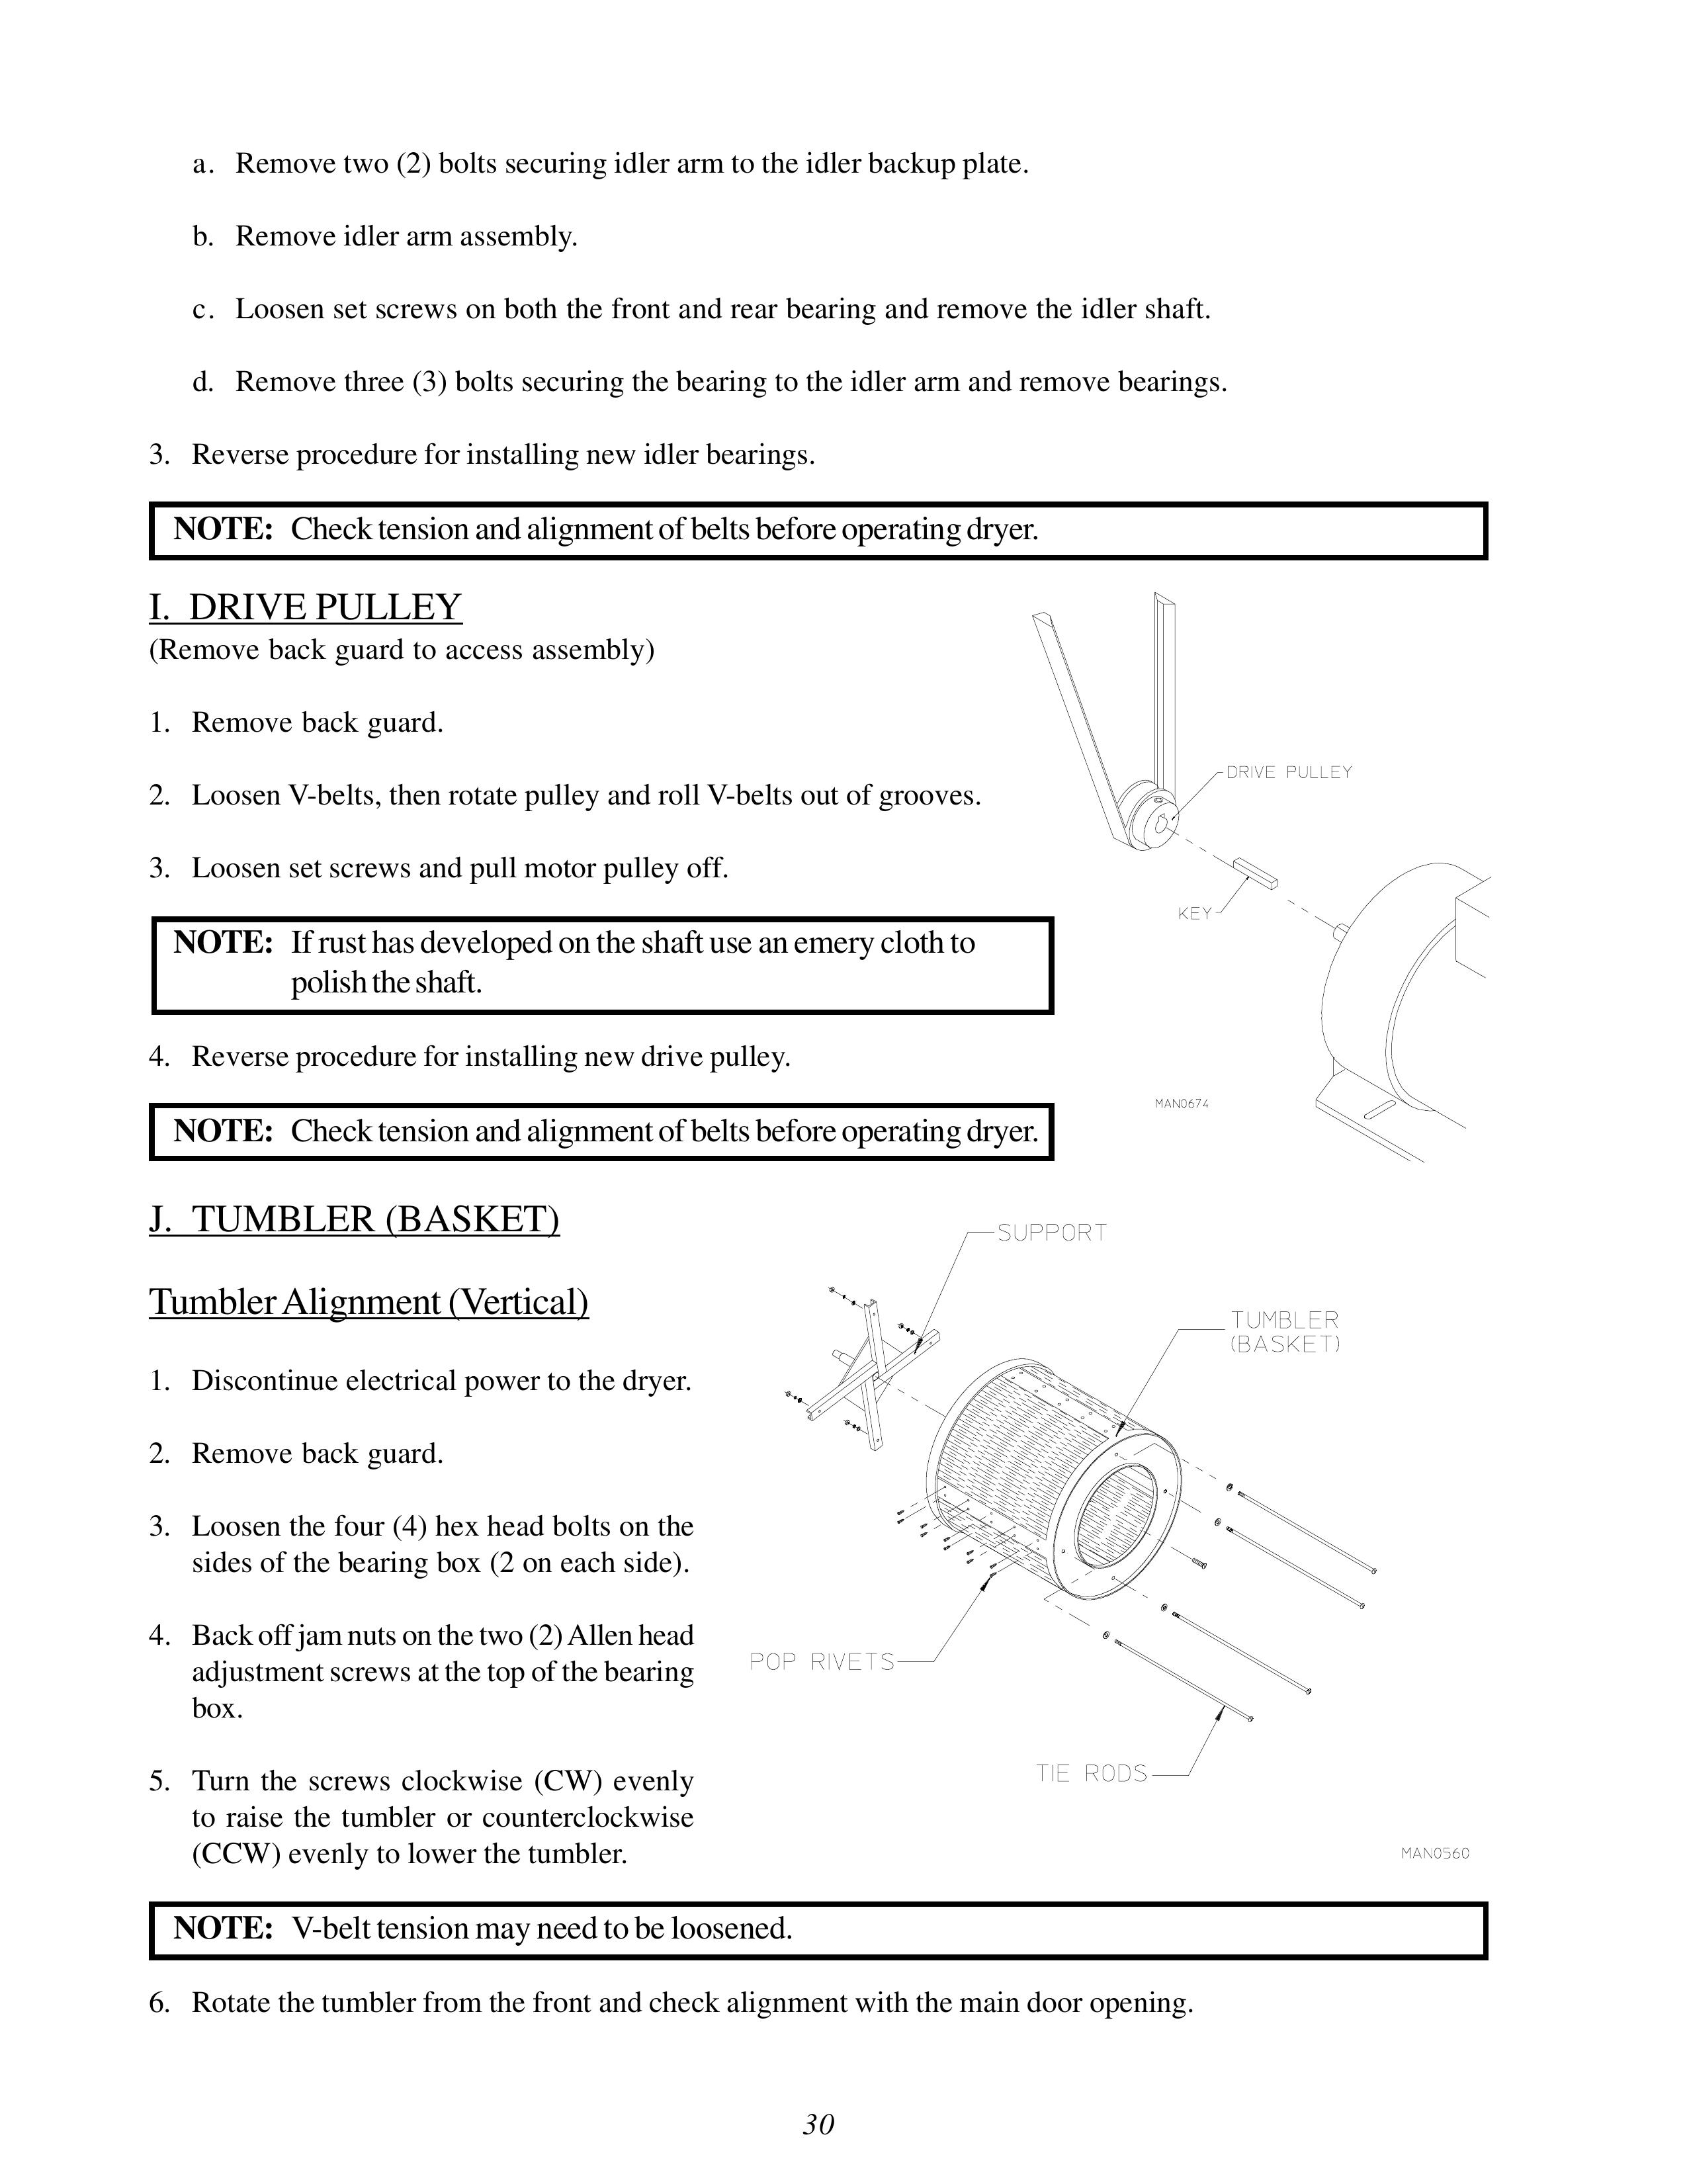 ADC ML-82 Clothes Dryer User Manual (Page 34)